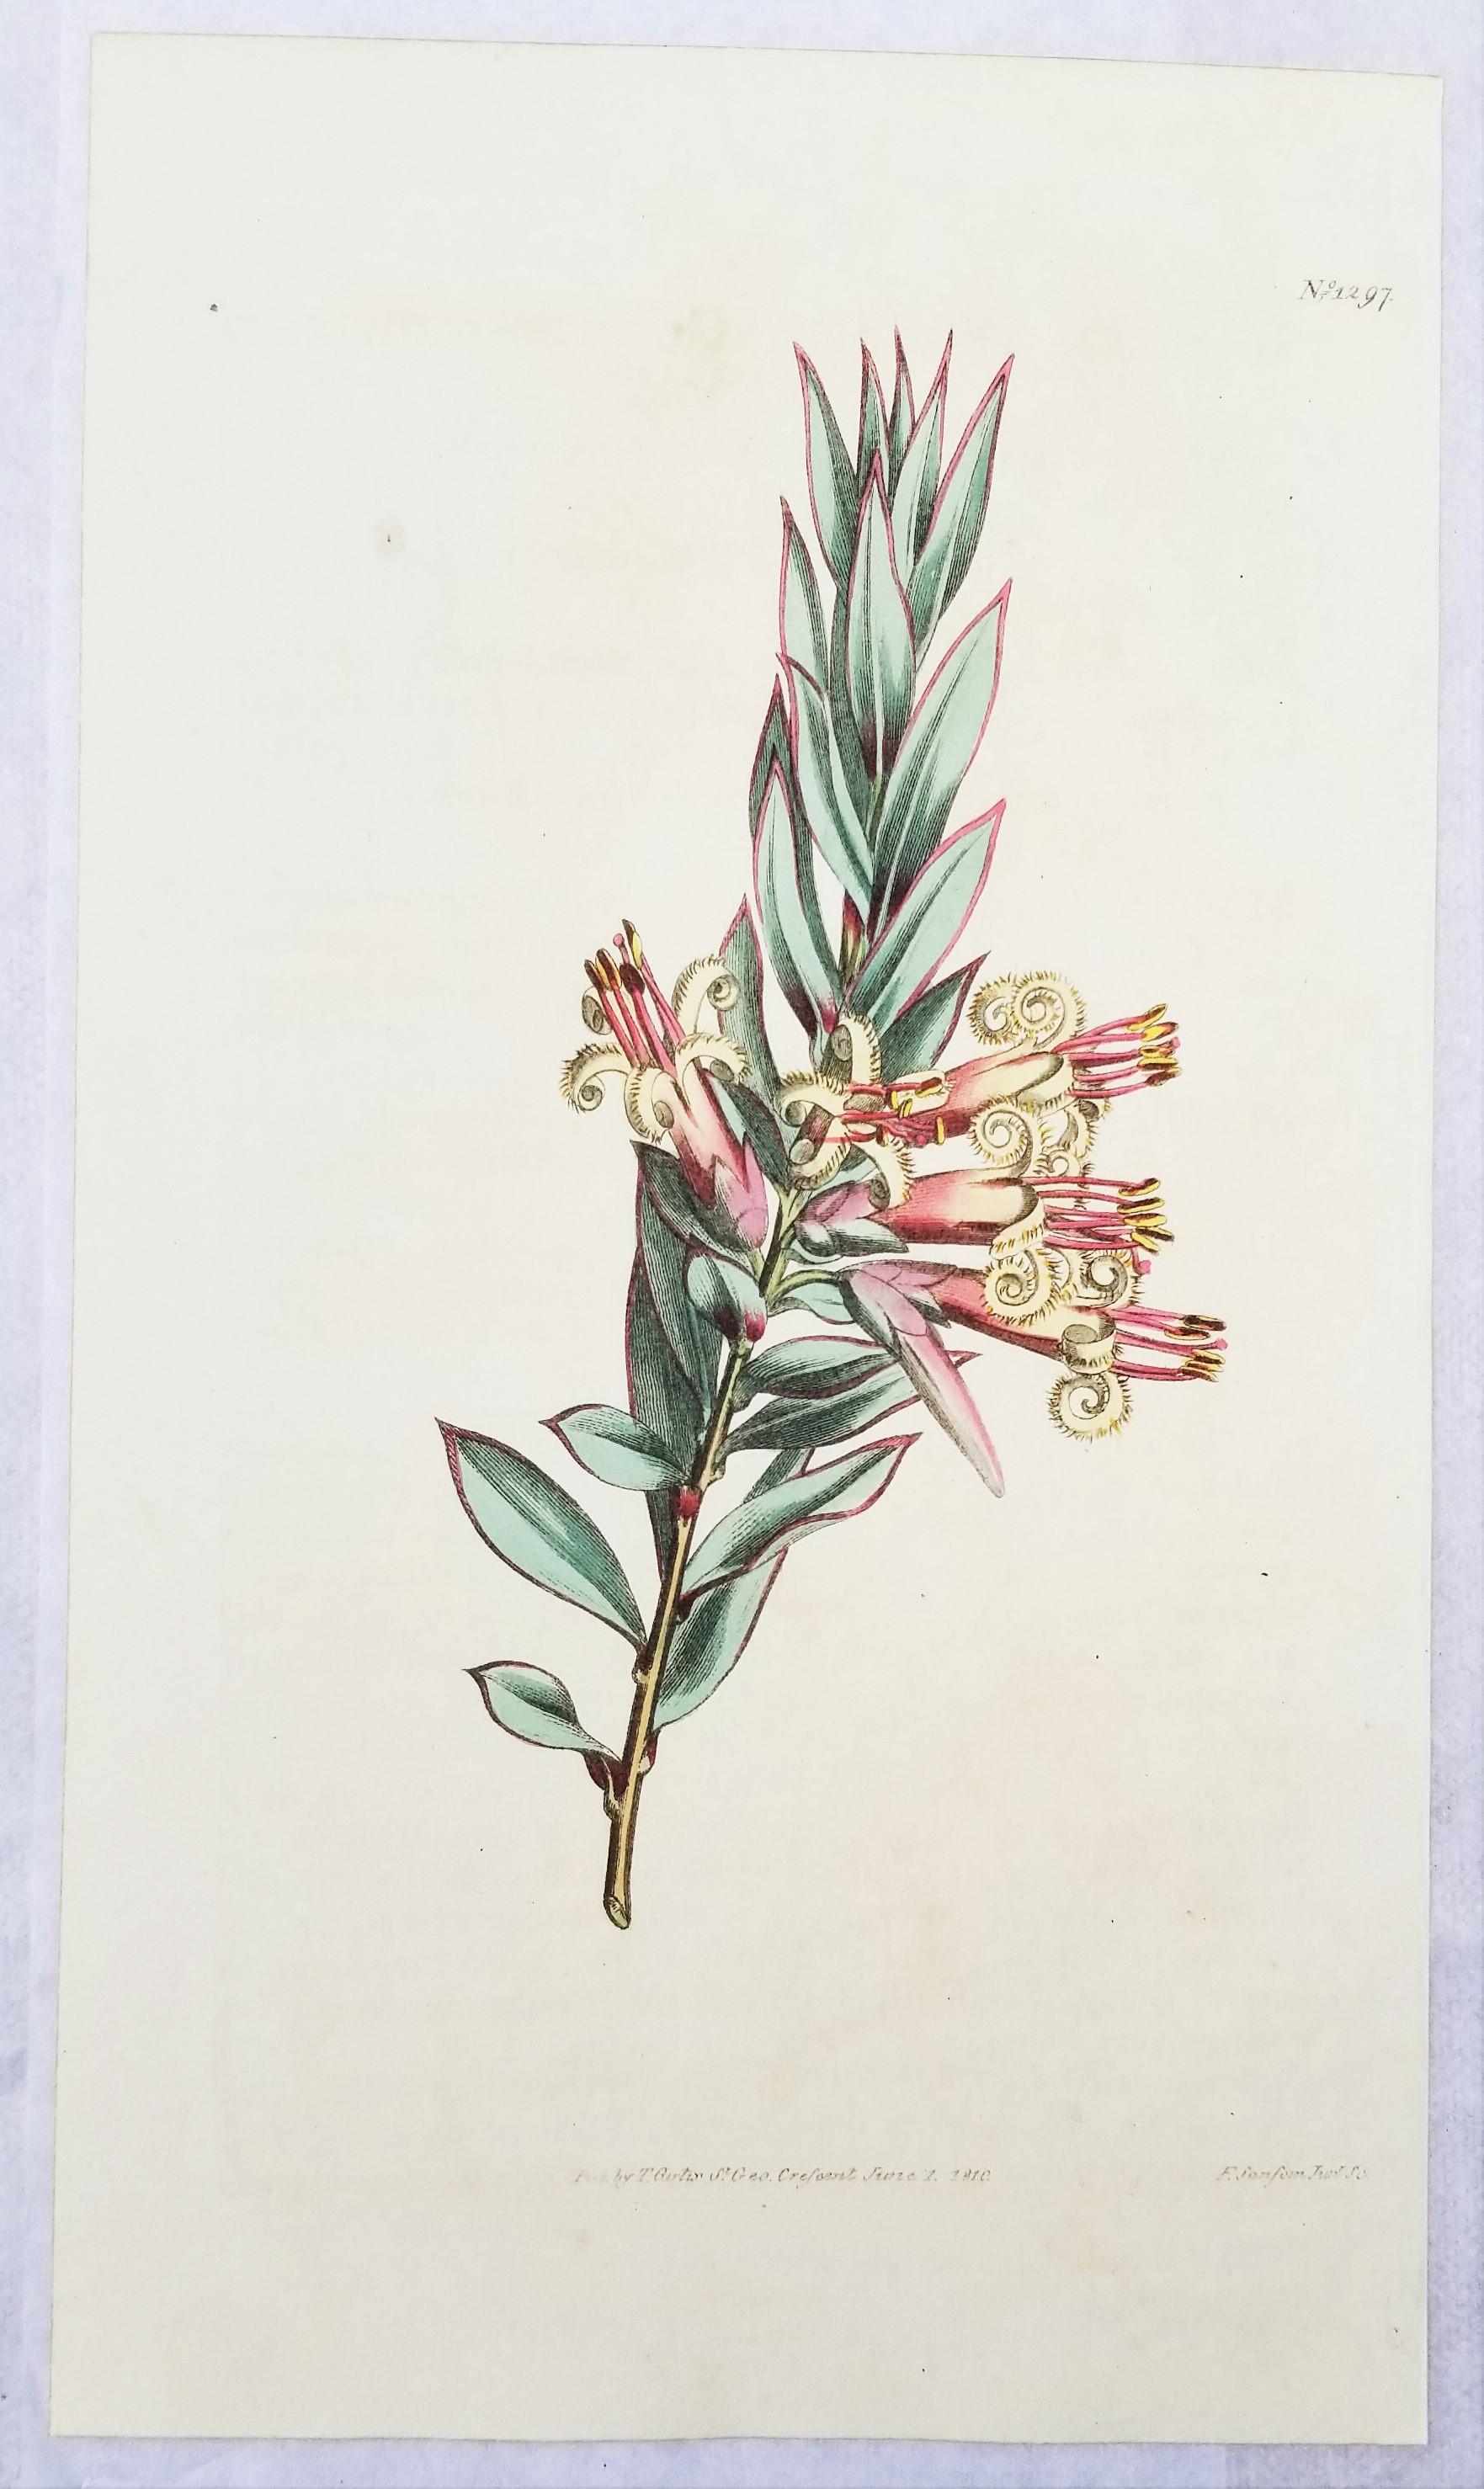 Artist: William Curtis (English, 1746-1799)
Title: Set of Six Hand-Colored Engravings
Portfolio: The Botanical Magazine
Year: 1789-1810
Medium: Set of Six Original Hand-Colored Engravings on wove and laid watermarked paper
Limited edition: approx.